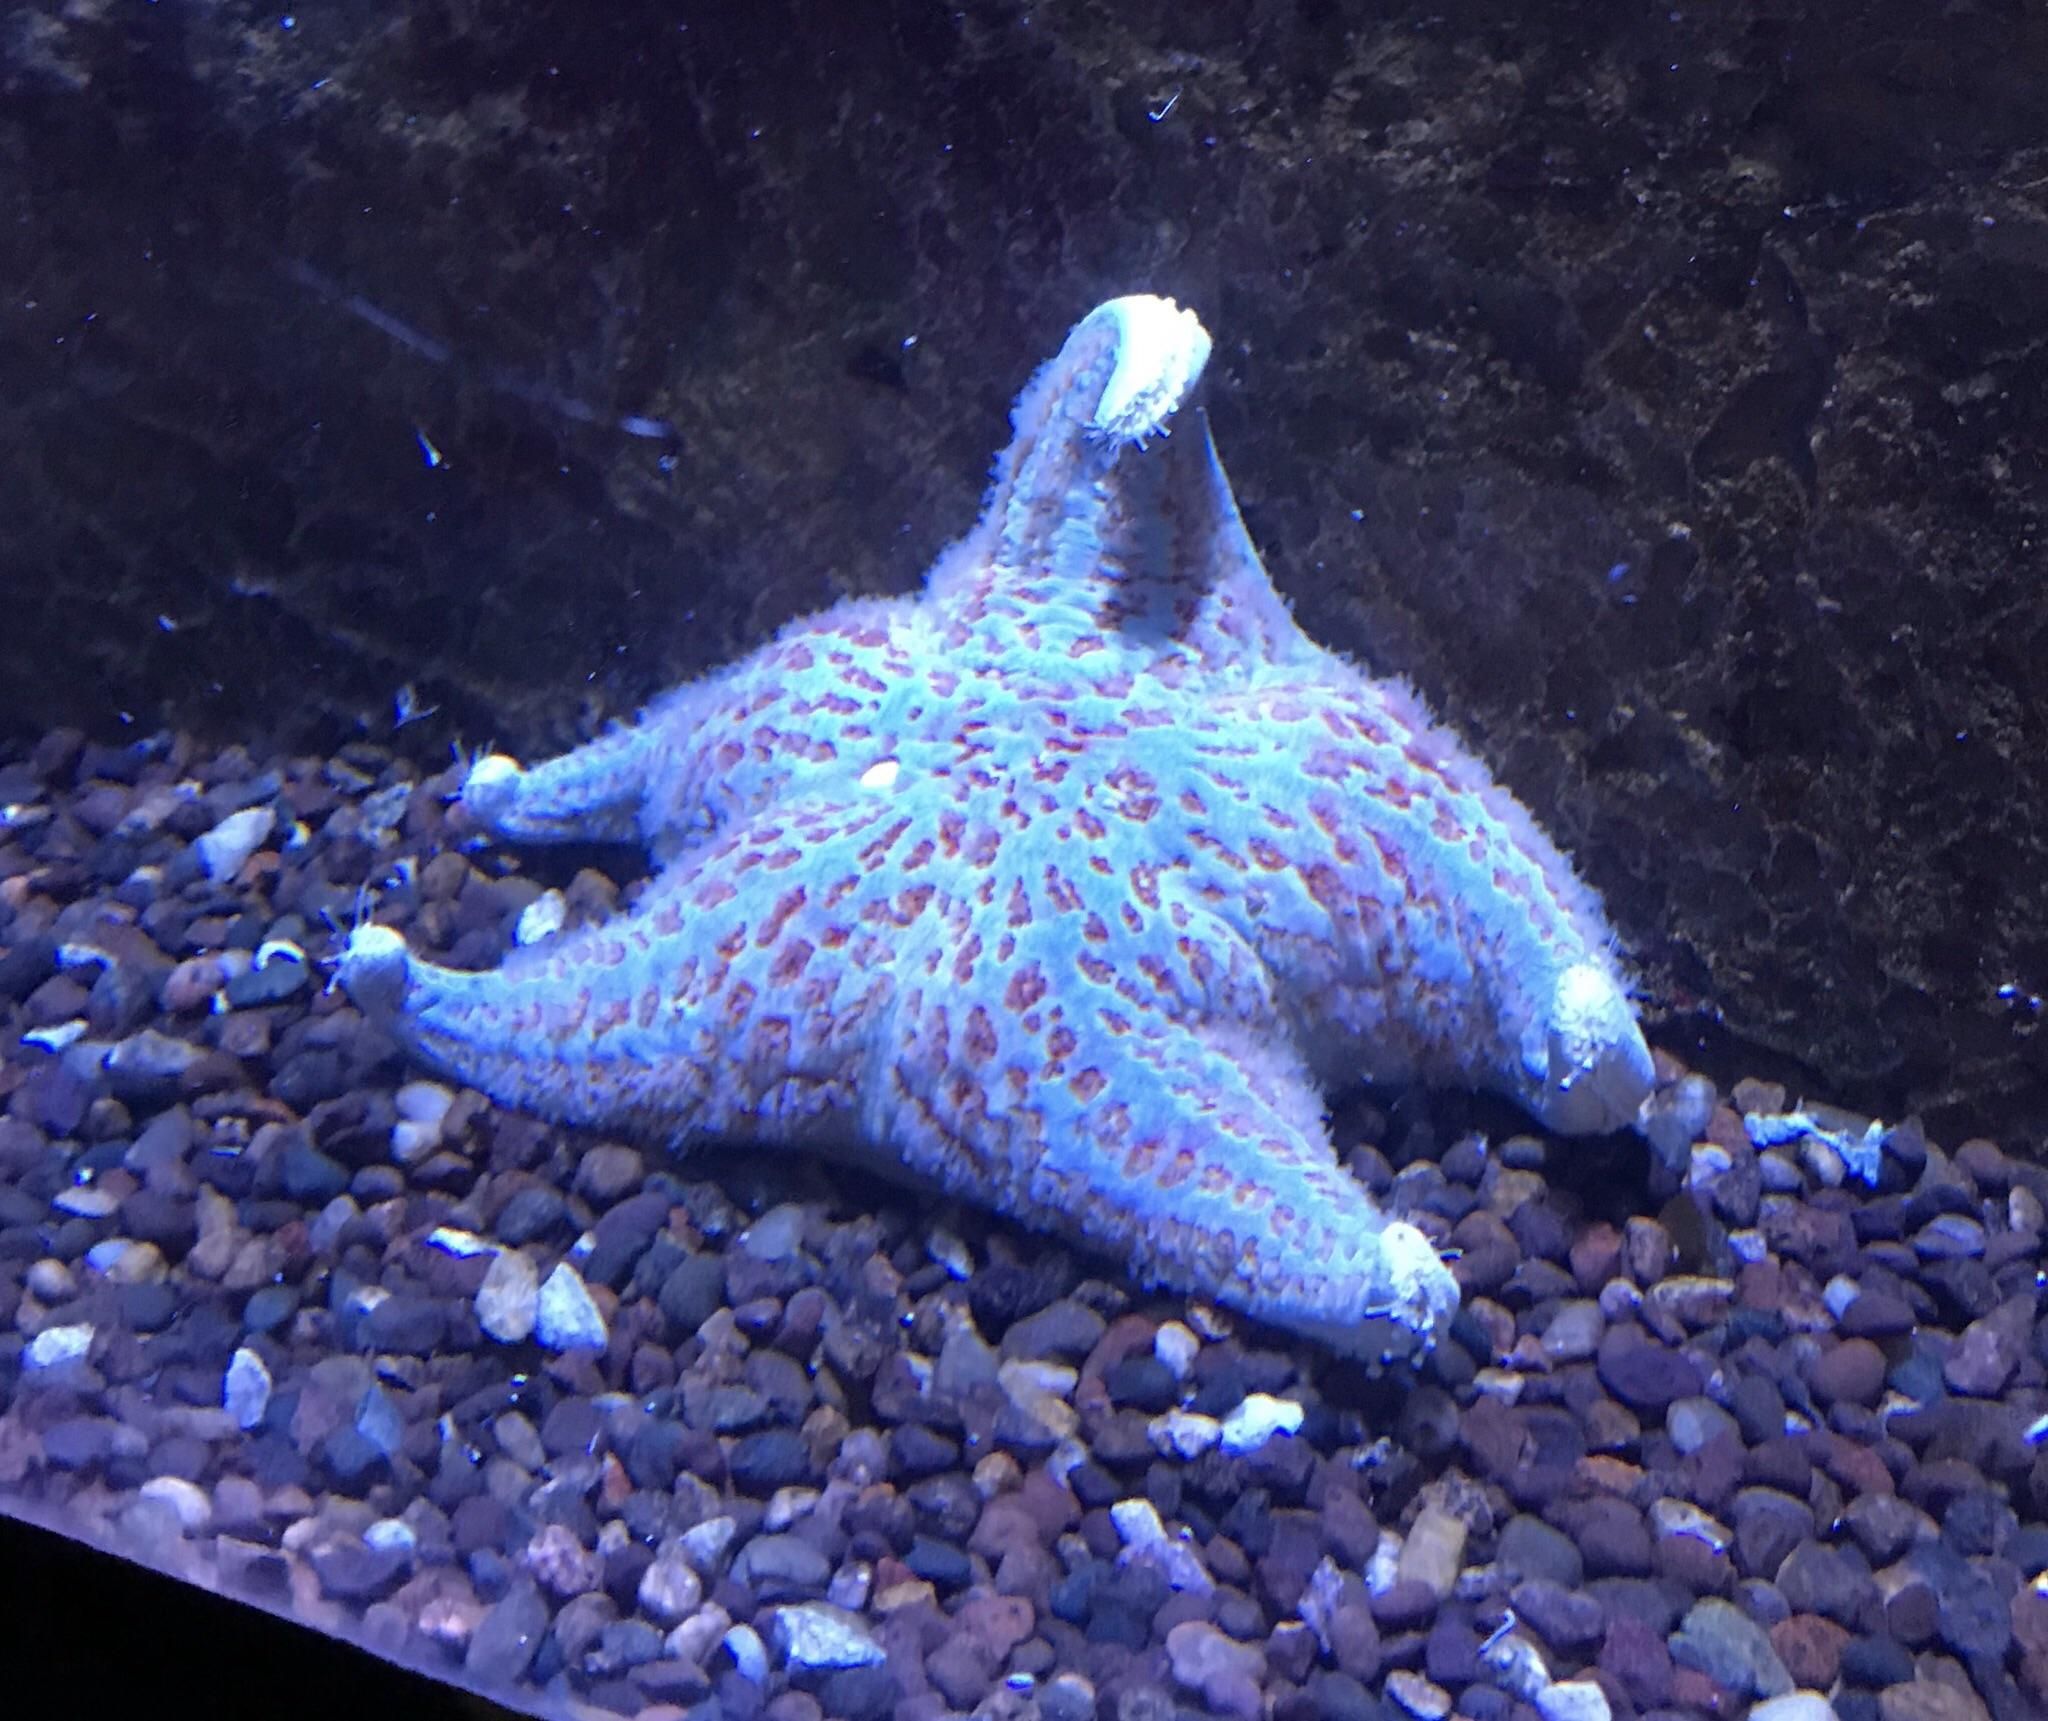 If my personality was a starfish...